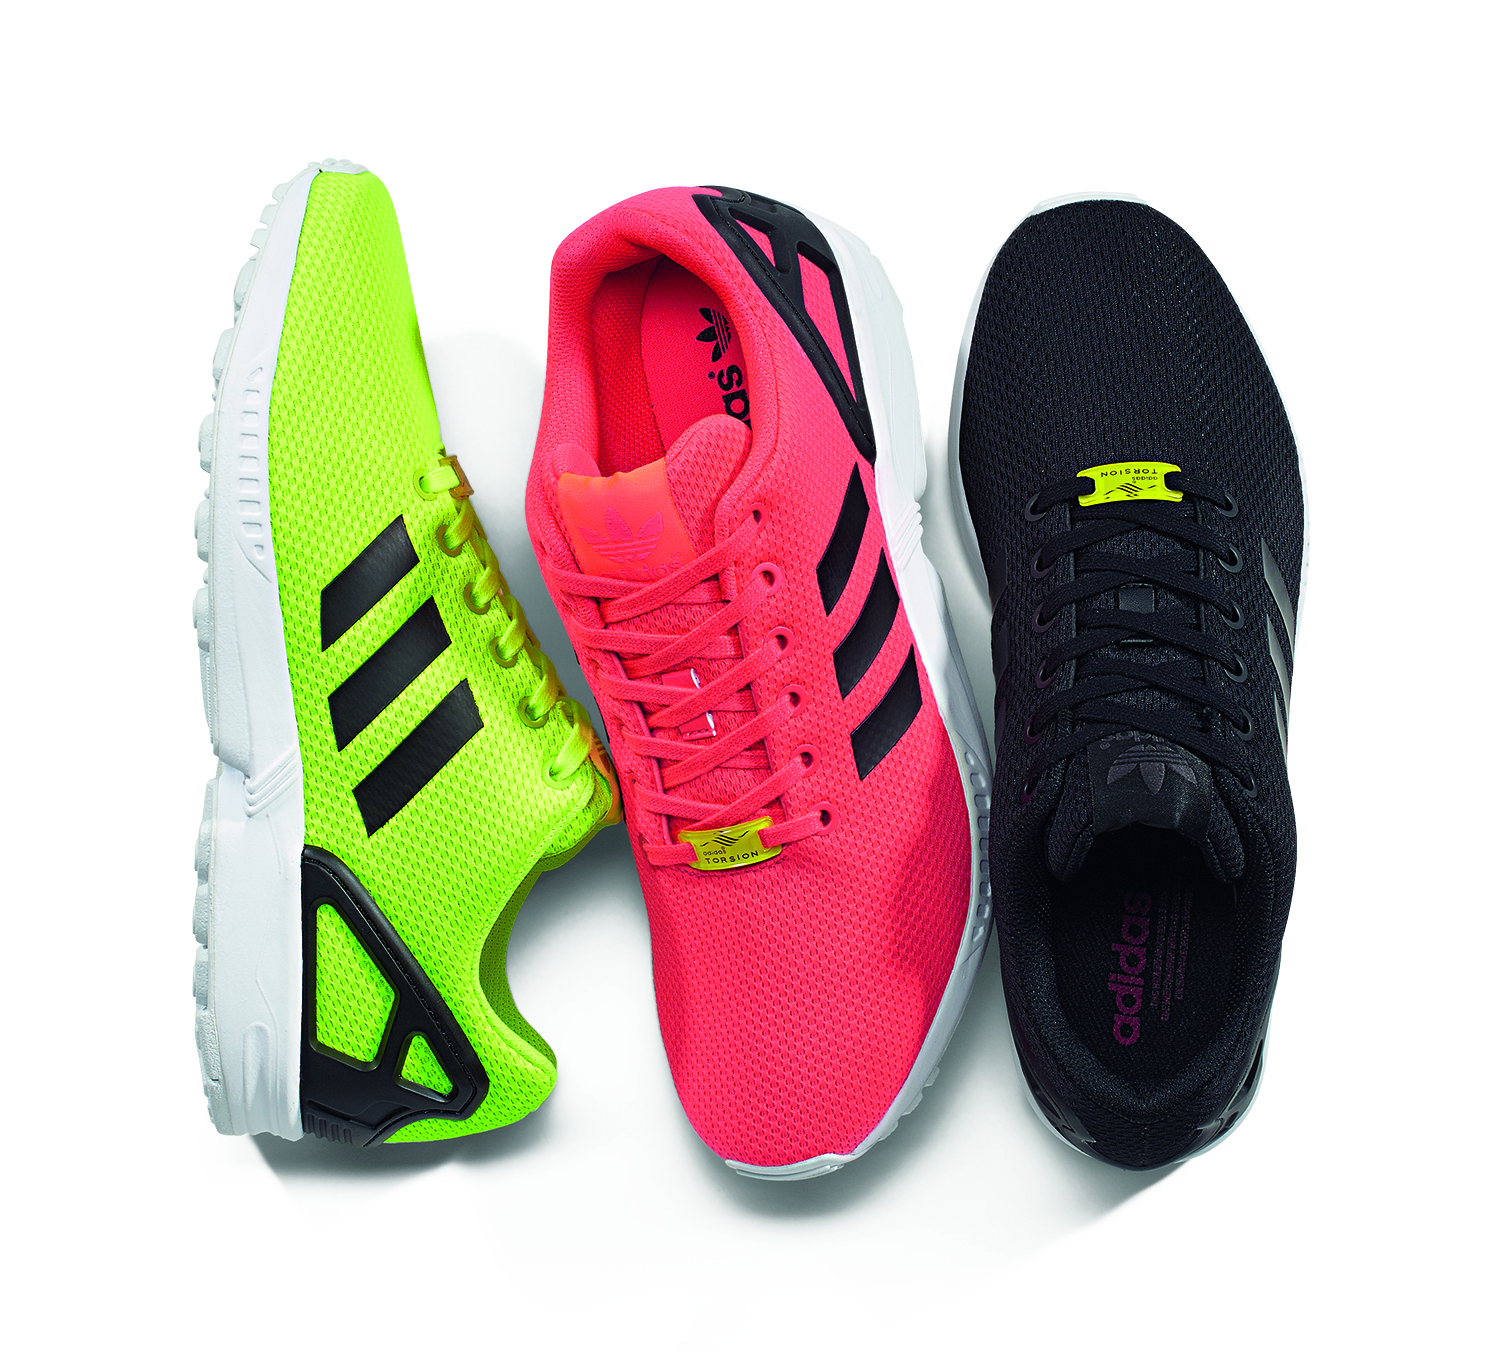 adidas ZX FLUX Base Pack 2